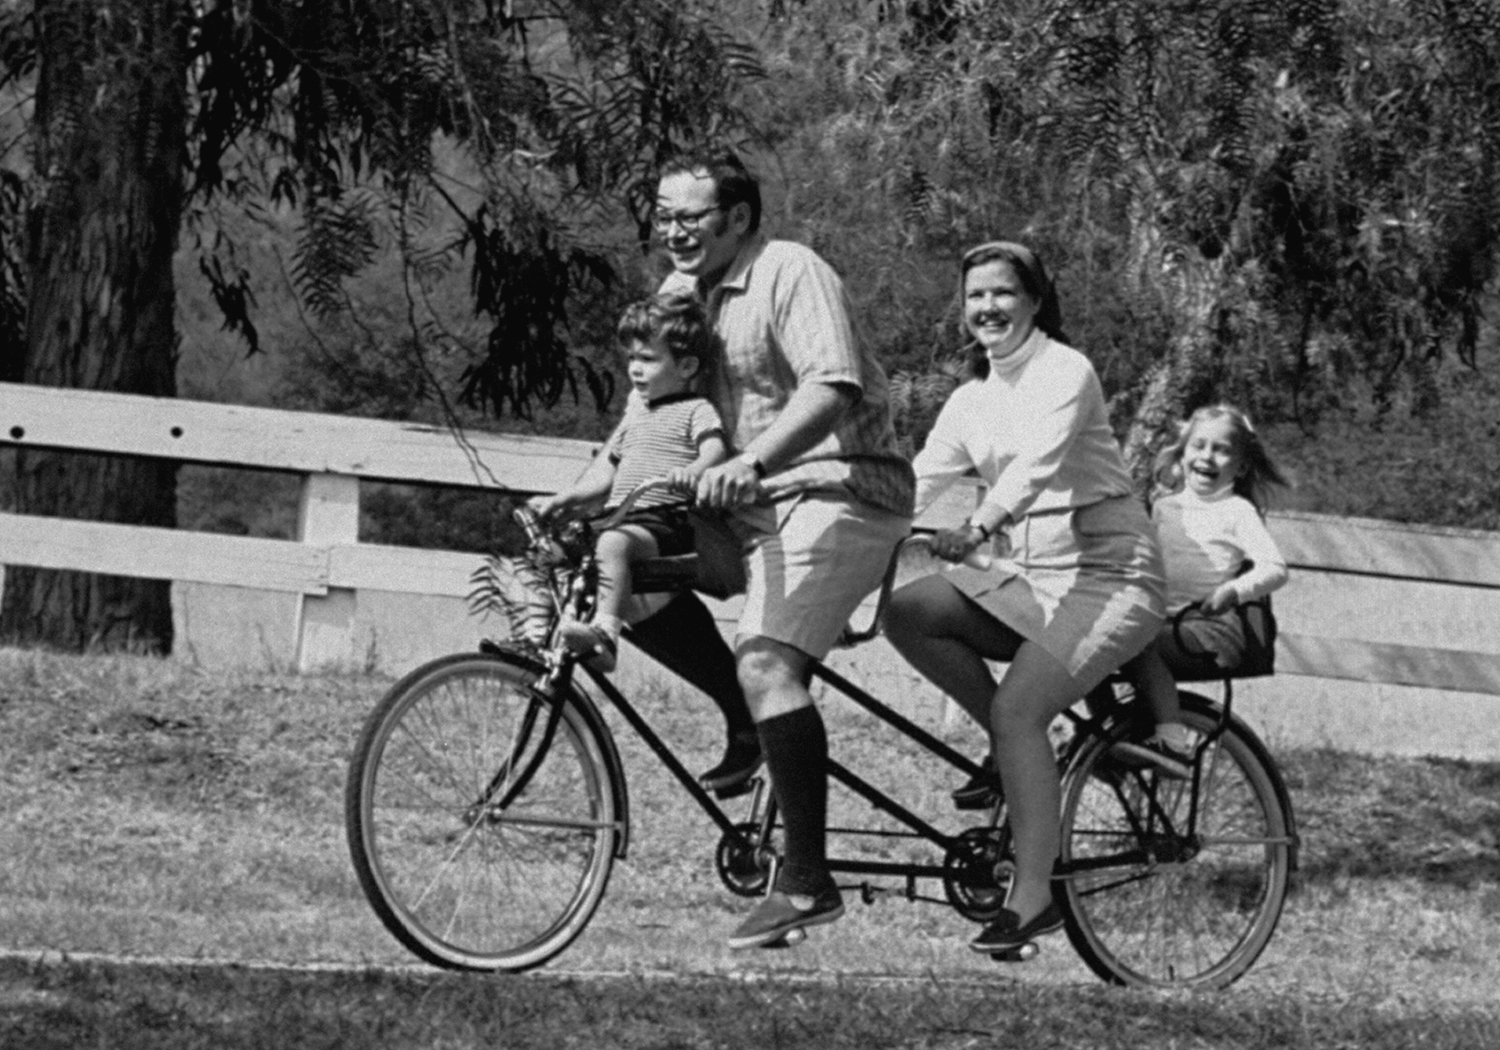 Nancy Lincoln, leukemia patient, with husband and two children, rides a bicycle-built-for-two in a California park, 1970.